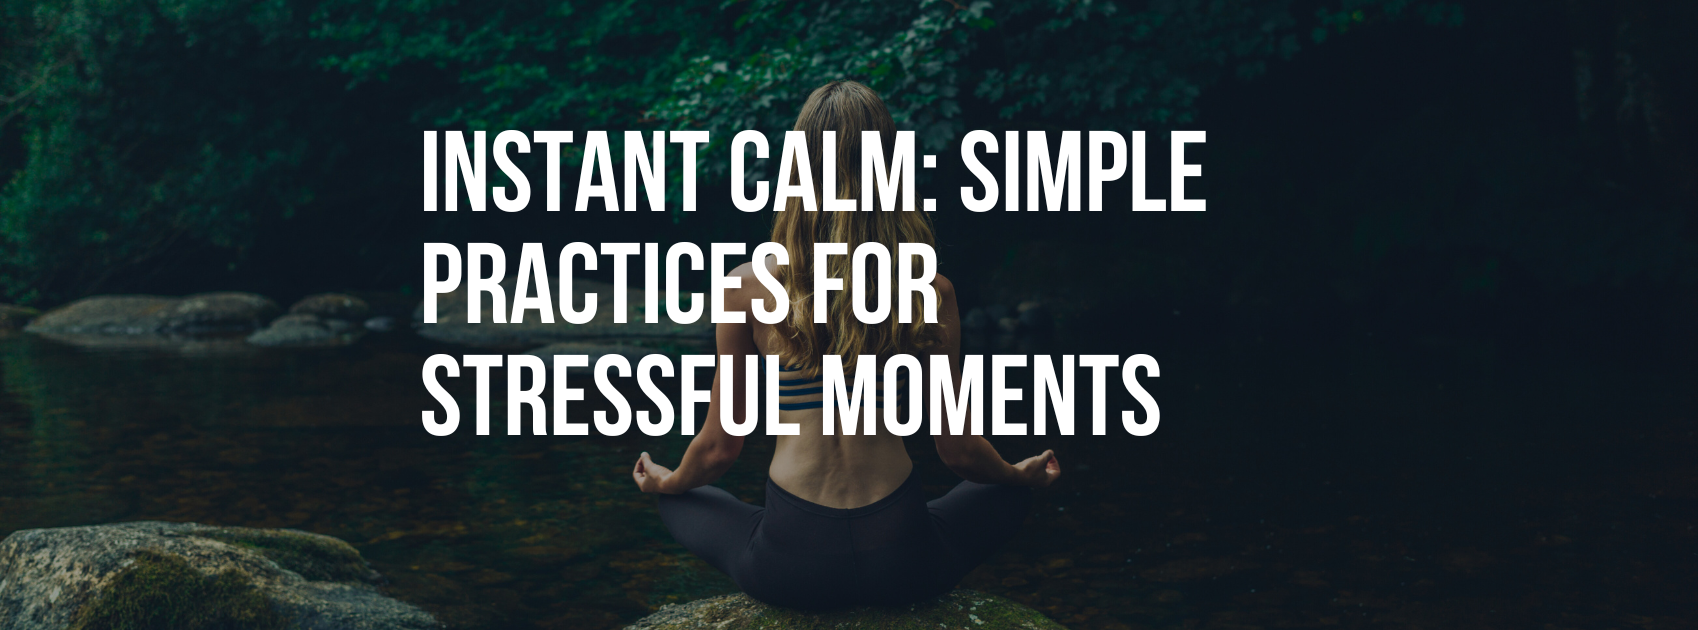 Instant Calm: Simple Practices for Stressful Moments